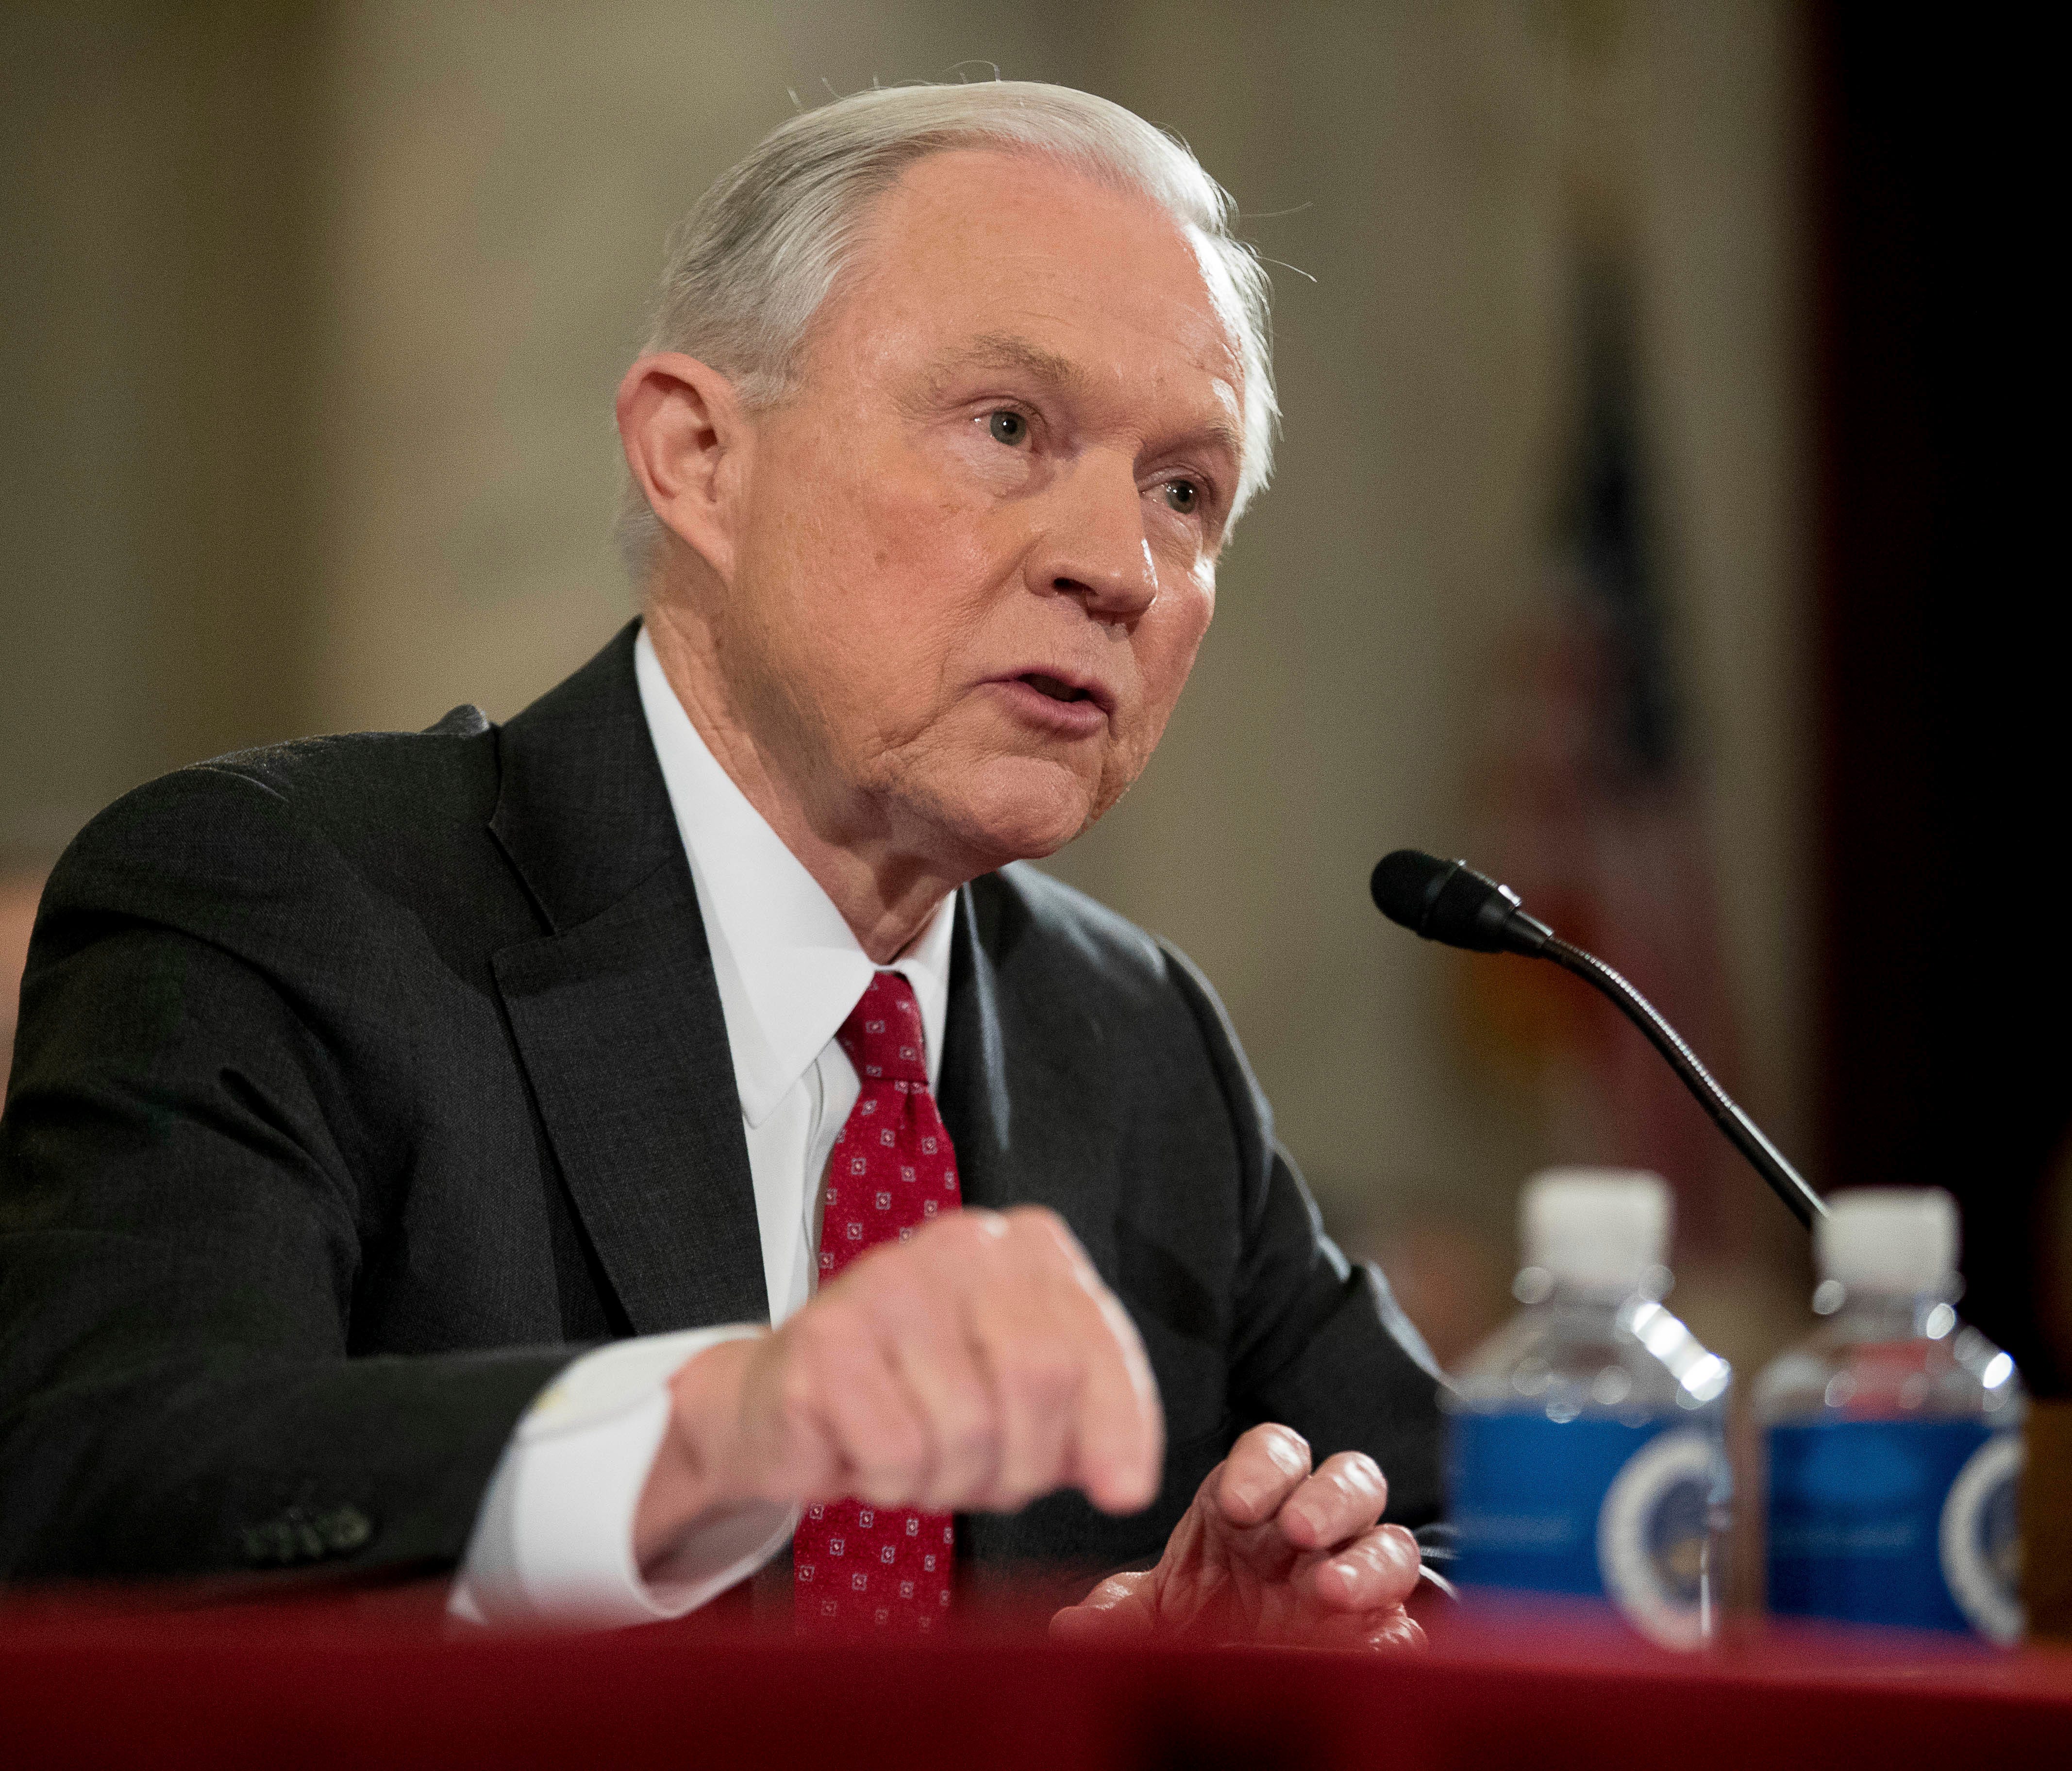 Attorney General-designate, Sen. Jeff Sessions, R-Ala. testifies on Capitol Hill in Washington, Jan. 10, 2017, at his confirmation hearing before the Senate Judiciary Committee.